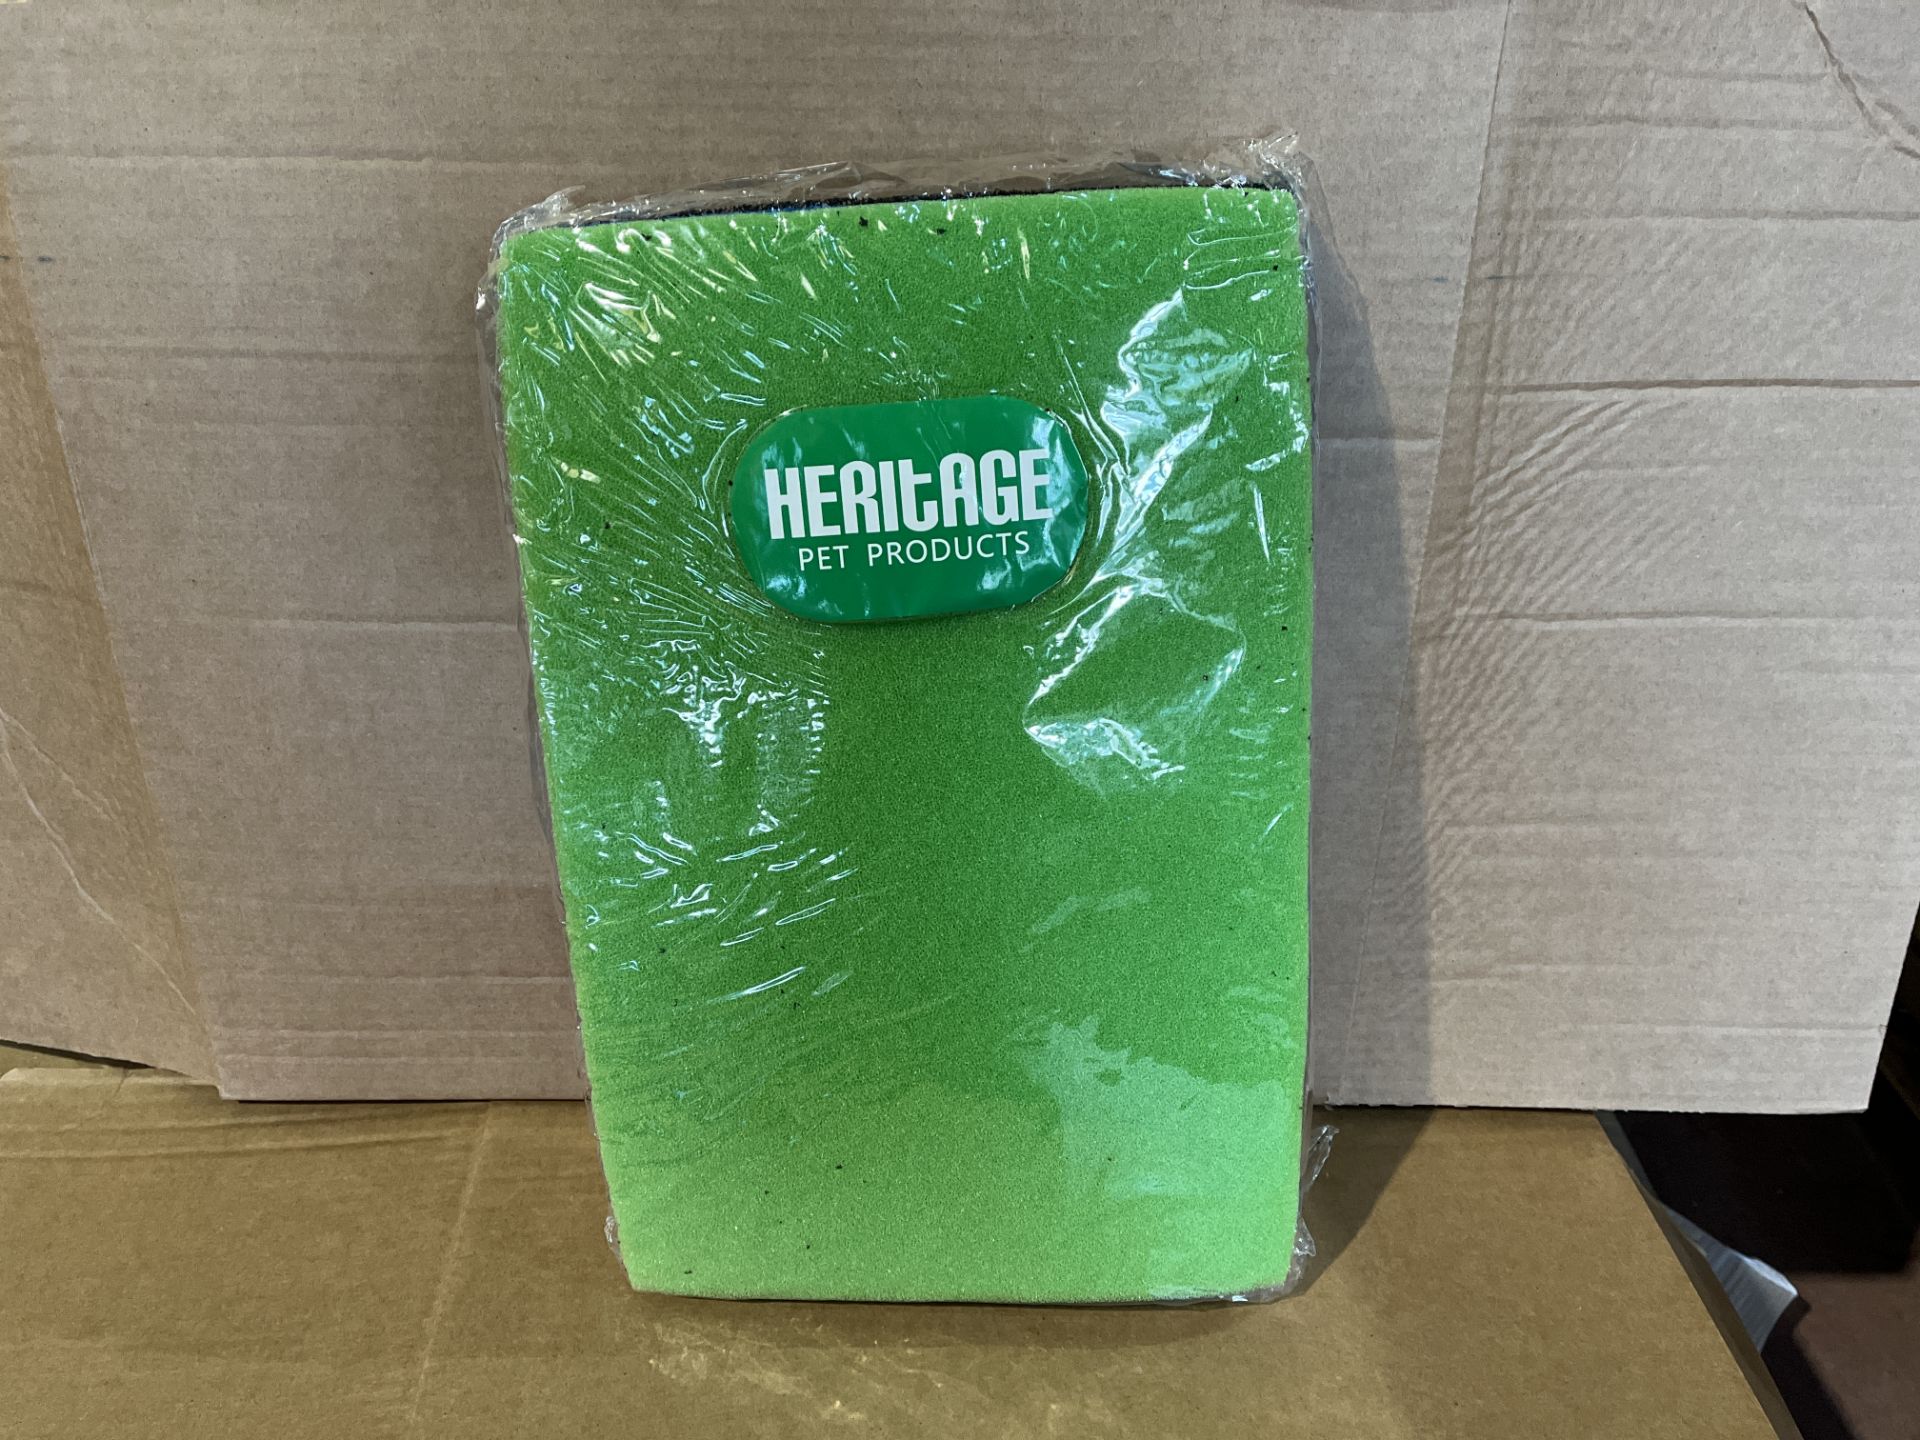 14 X BRAND NEW HERITAGE RETICULATED 3 PIECE FOAM POND FILTER SETS RRP £28 EACH R15-12